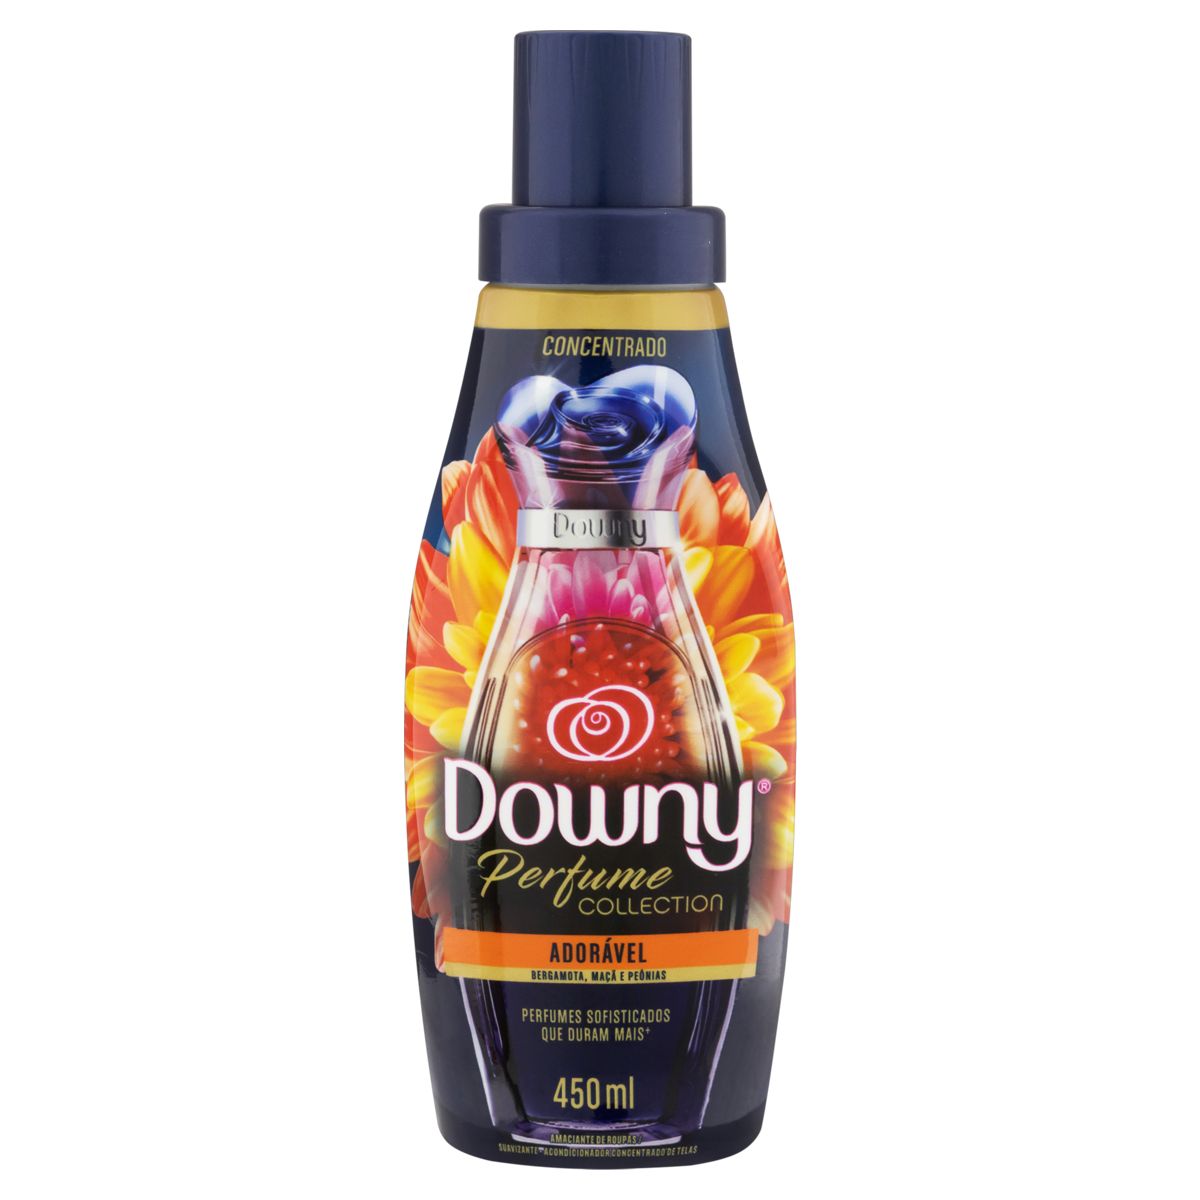 Amaciante Conc. Downy Perfume Collection Adorável 450ml image number 0